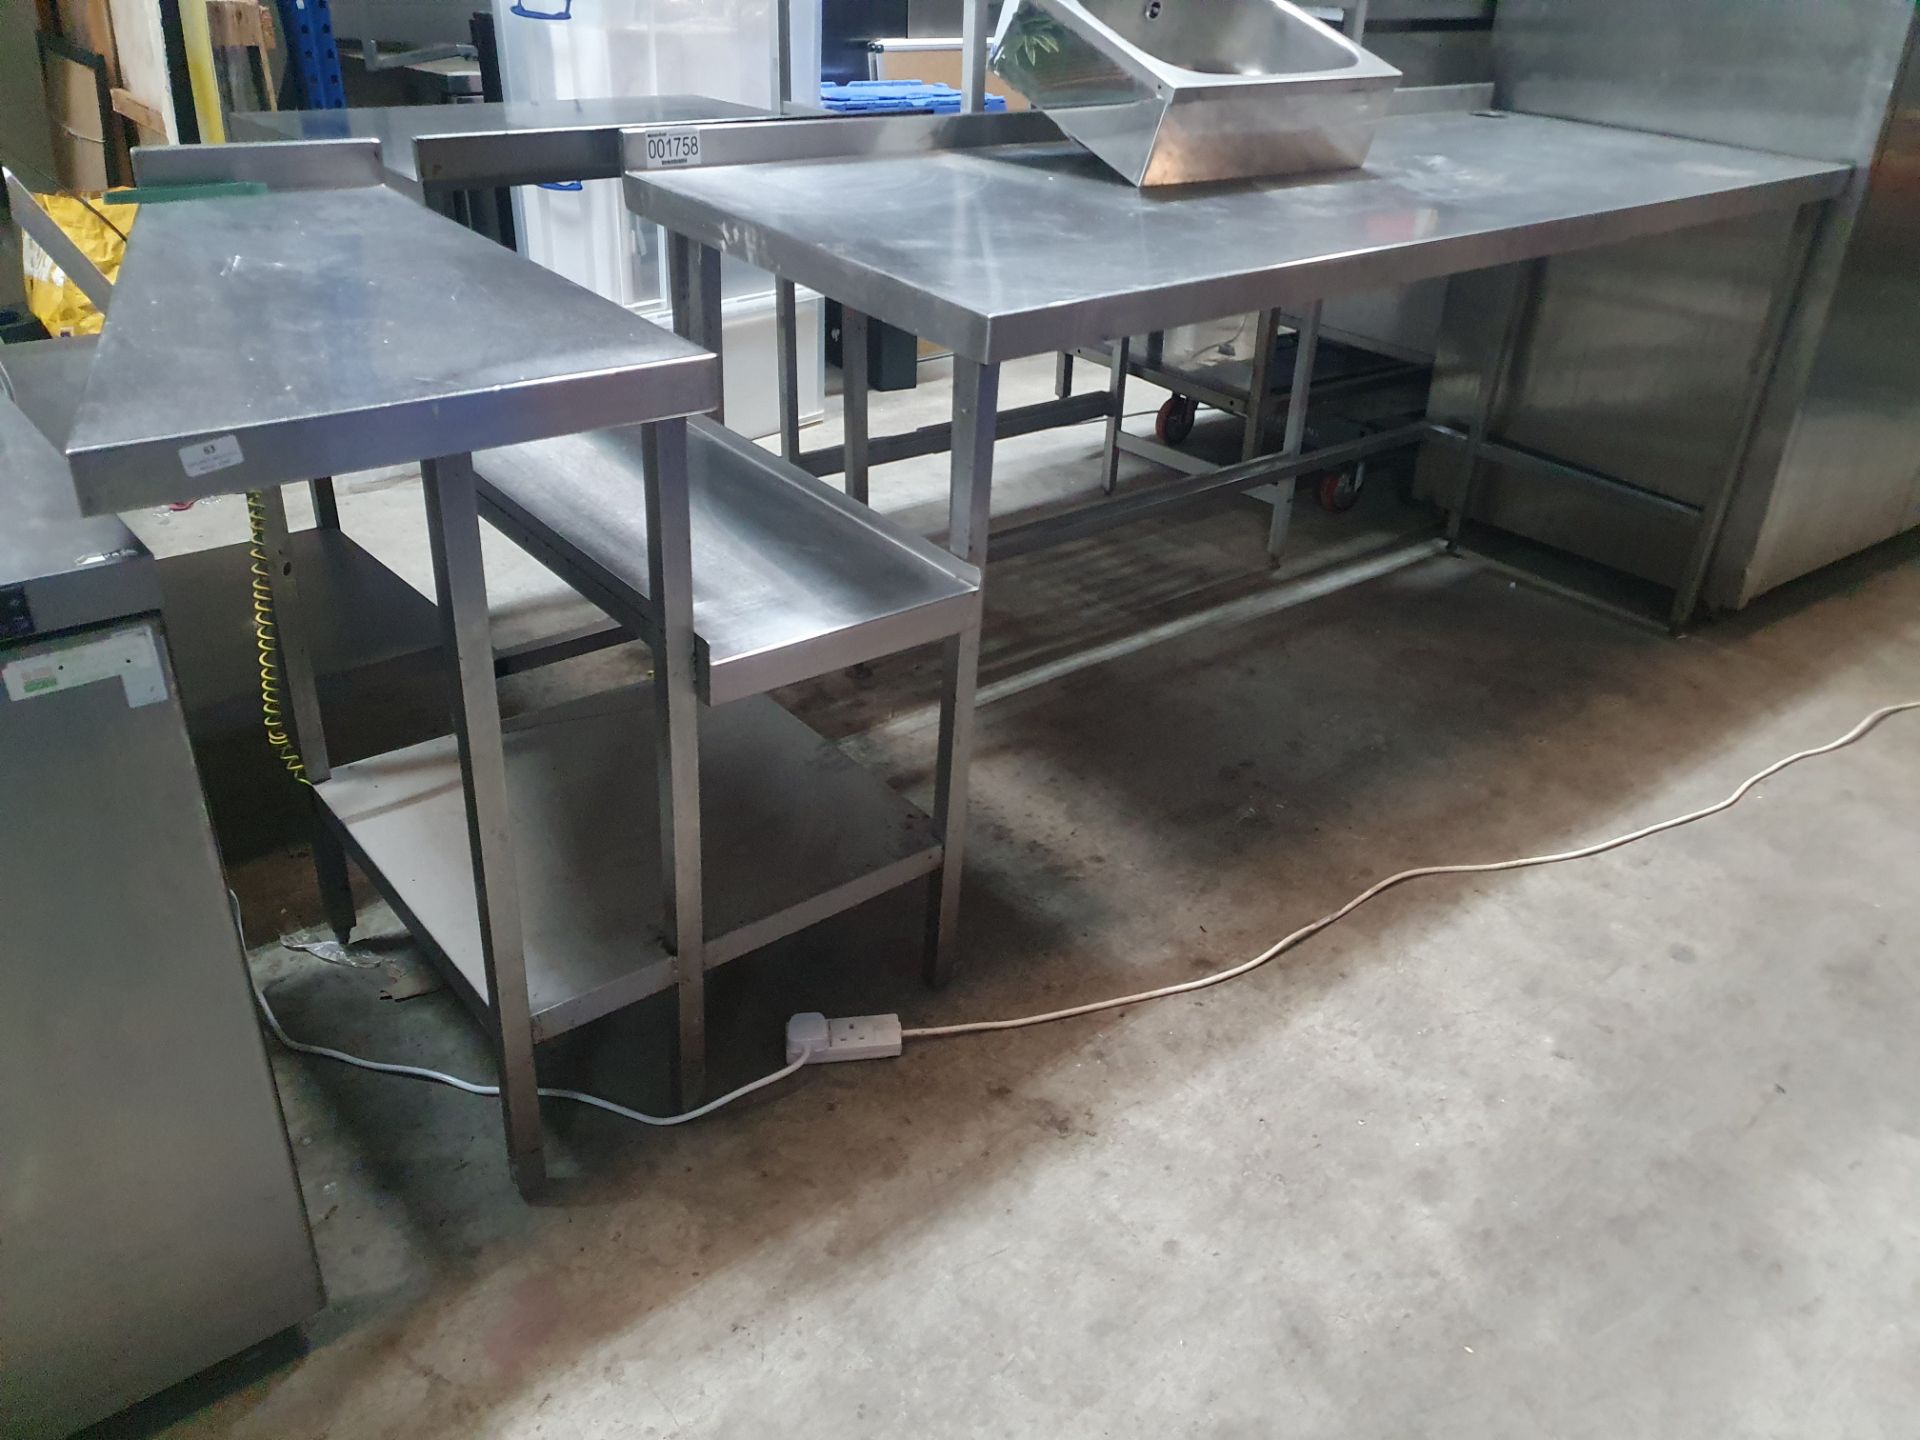 * S/S prep bench with angled left end and applience shelf - 2800w x 750d x 900h